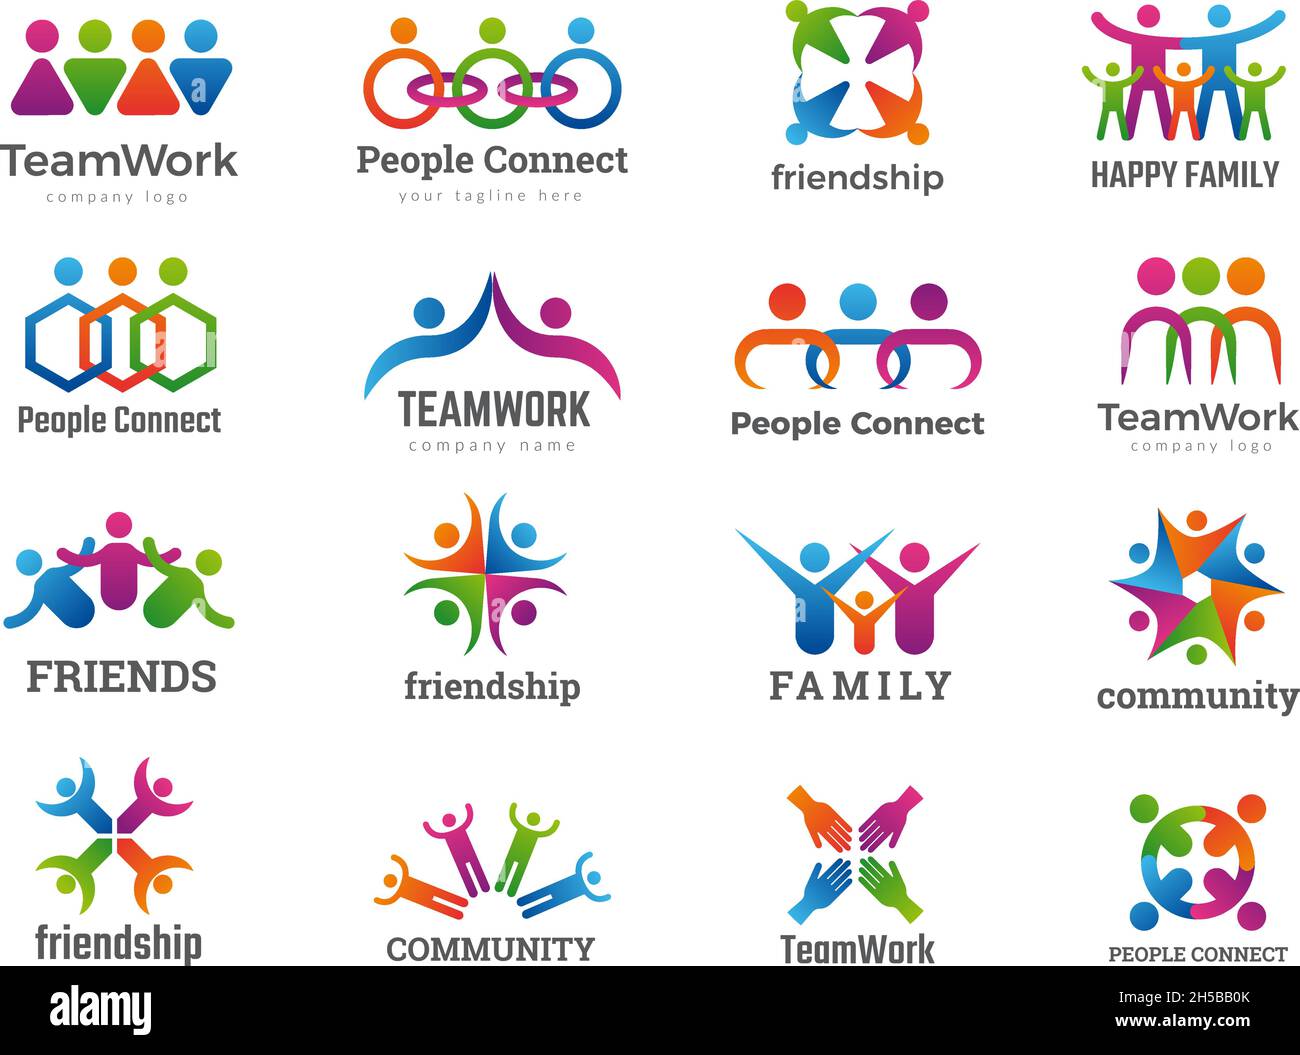 Partners logo. Connecting people teamwork friendship successful family union recent vector business symbols collection Stock Vector